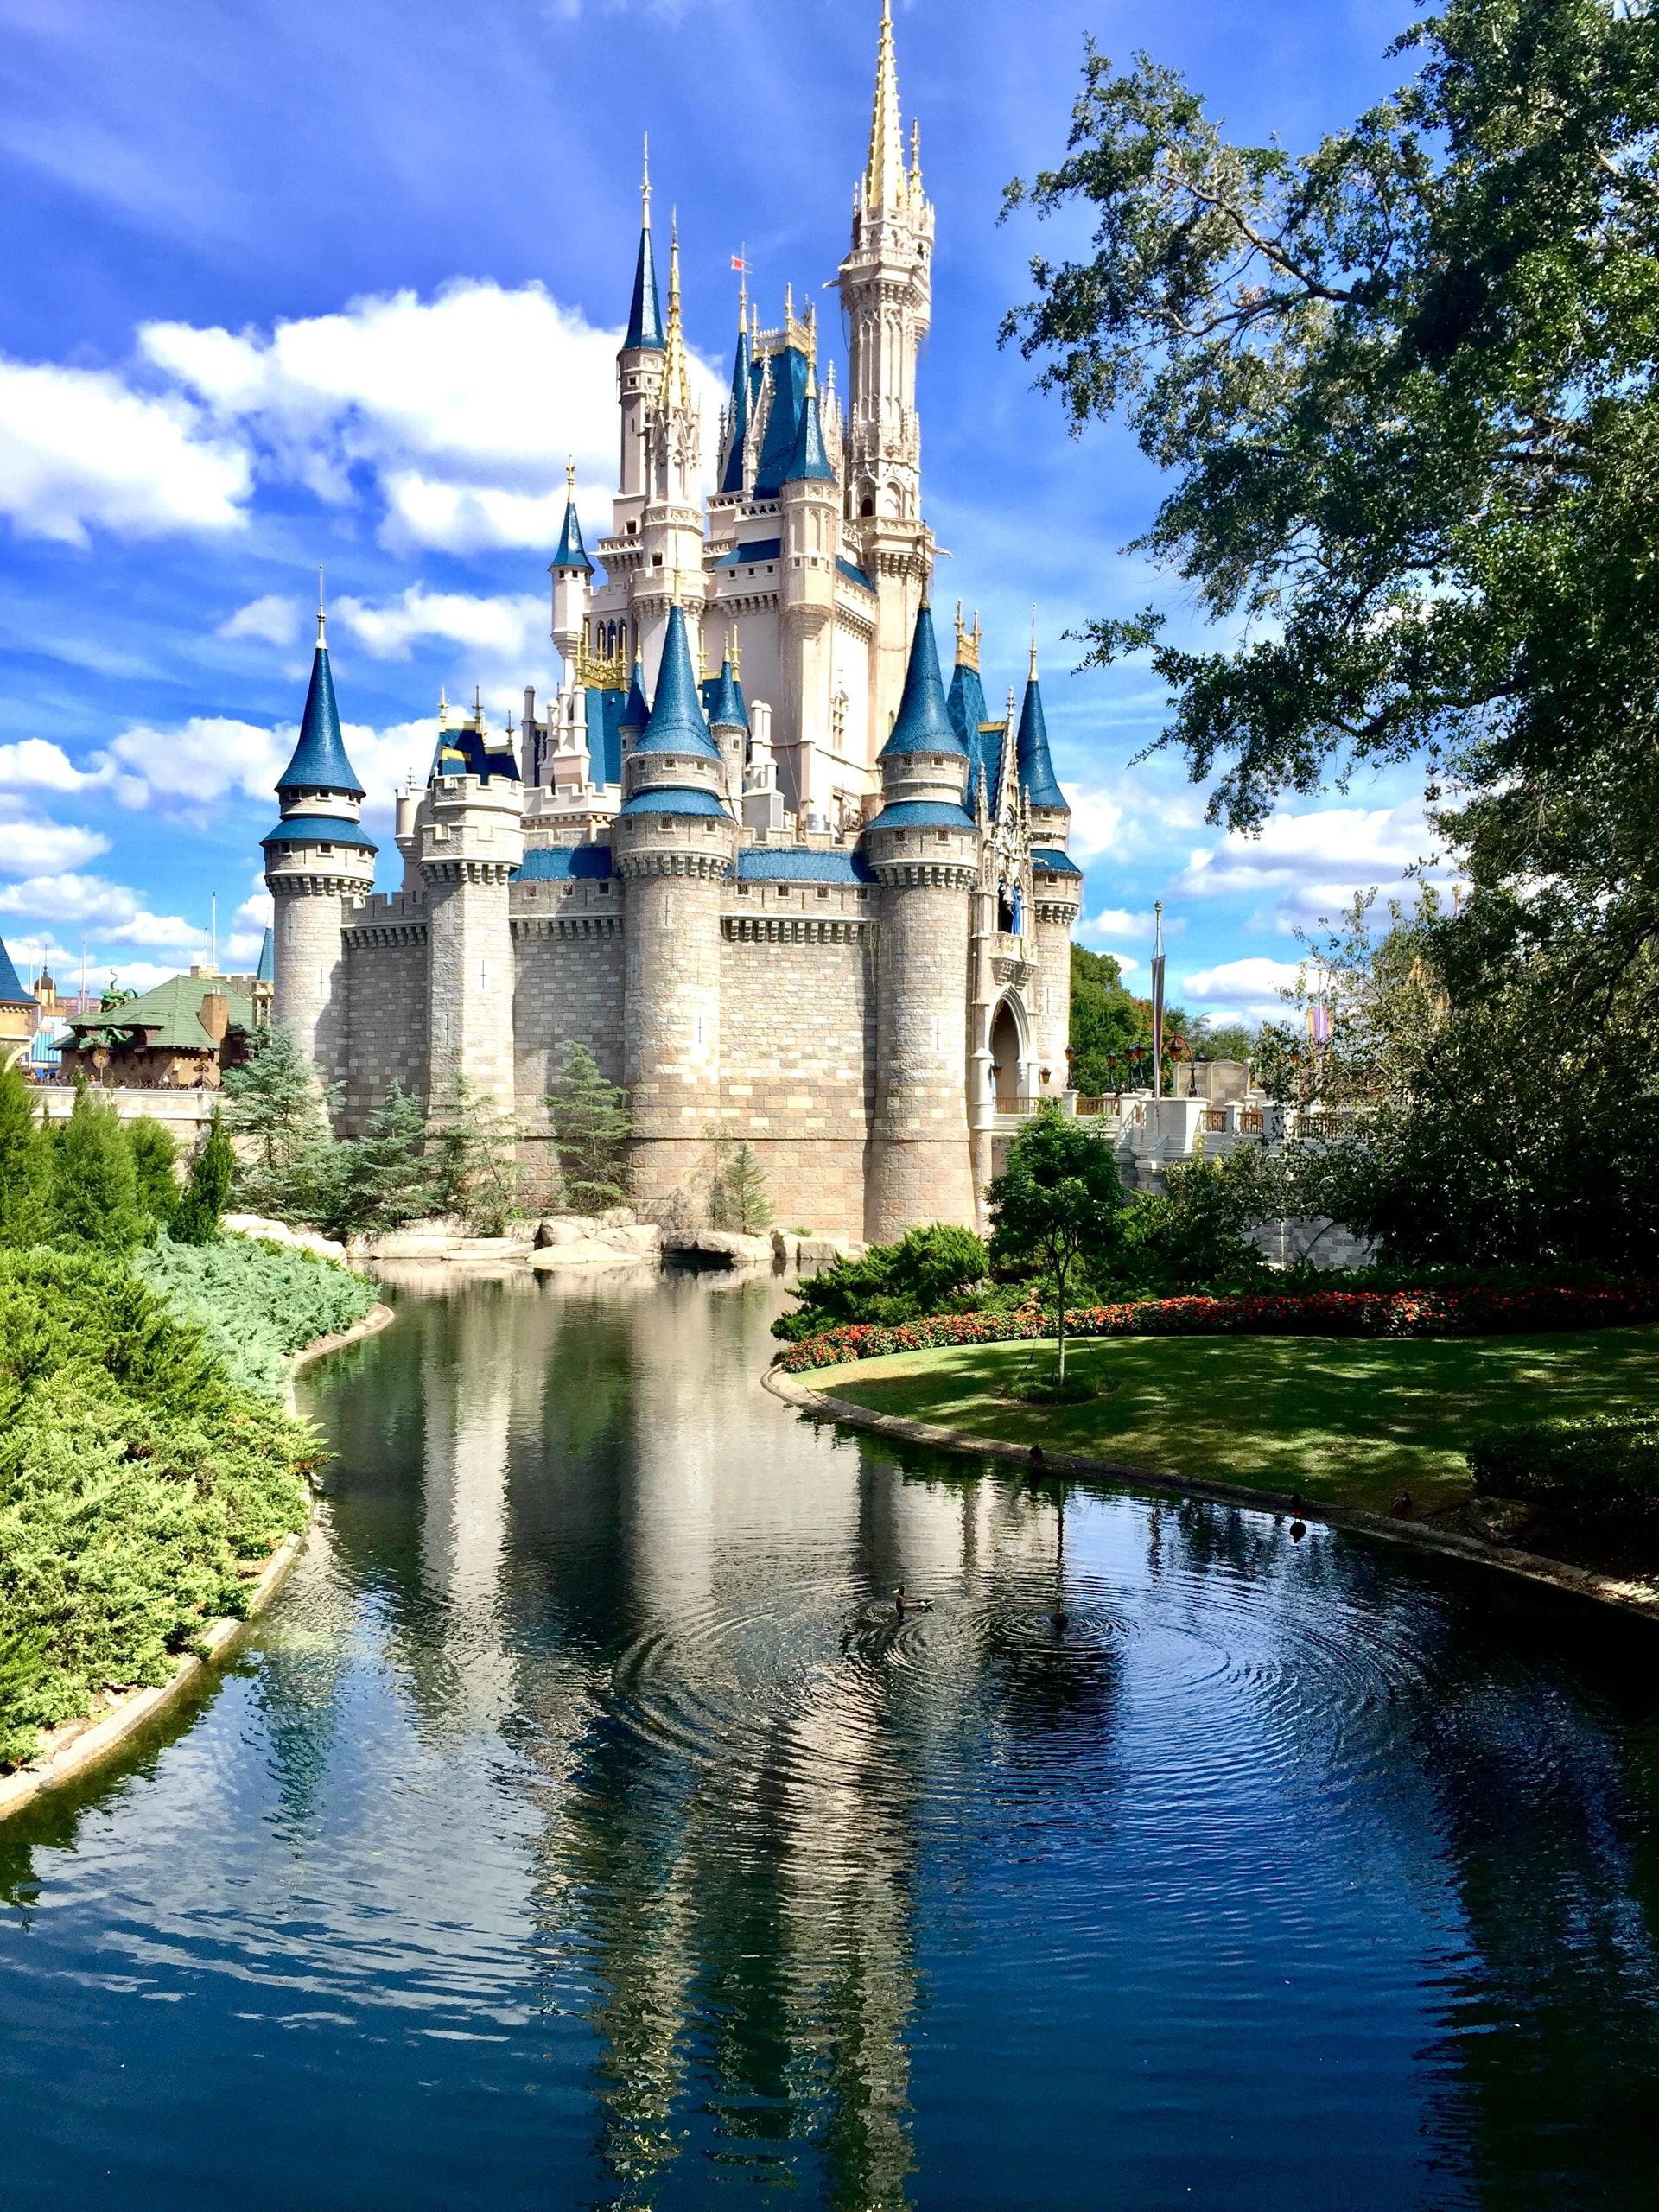 View of Disney castle on a clear summer day